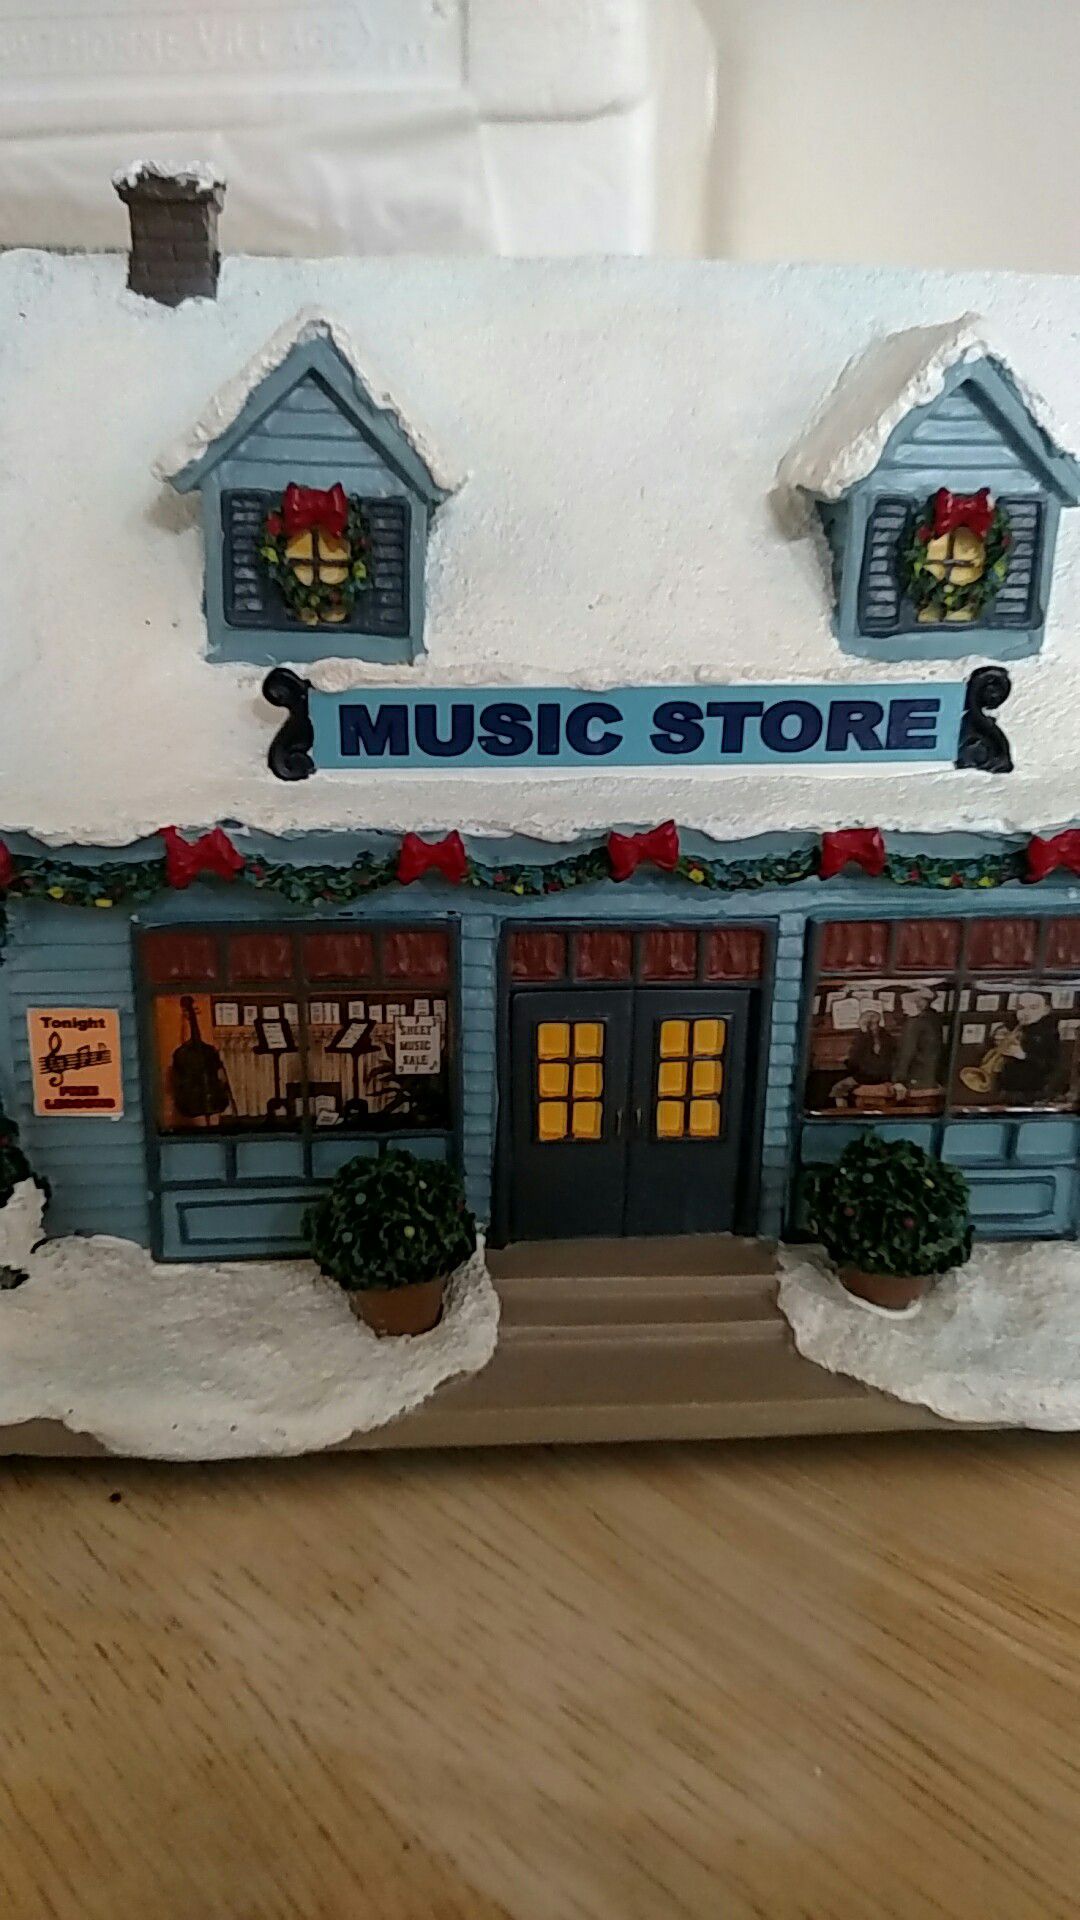 Norman Rockwell's Christmas village Music store